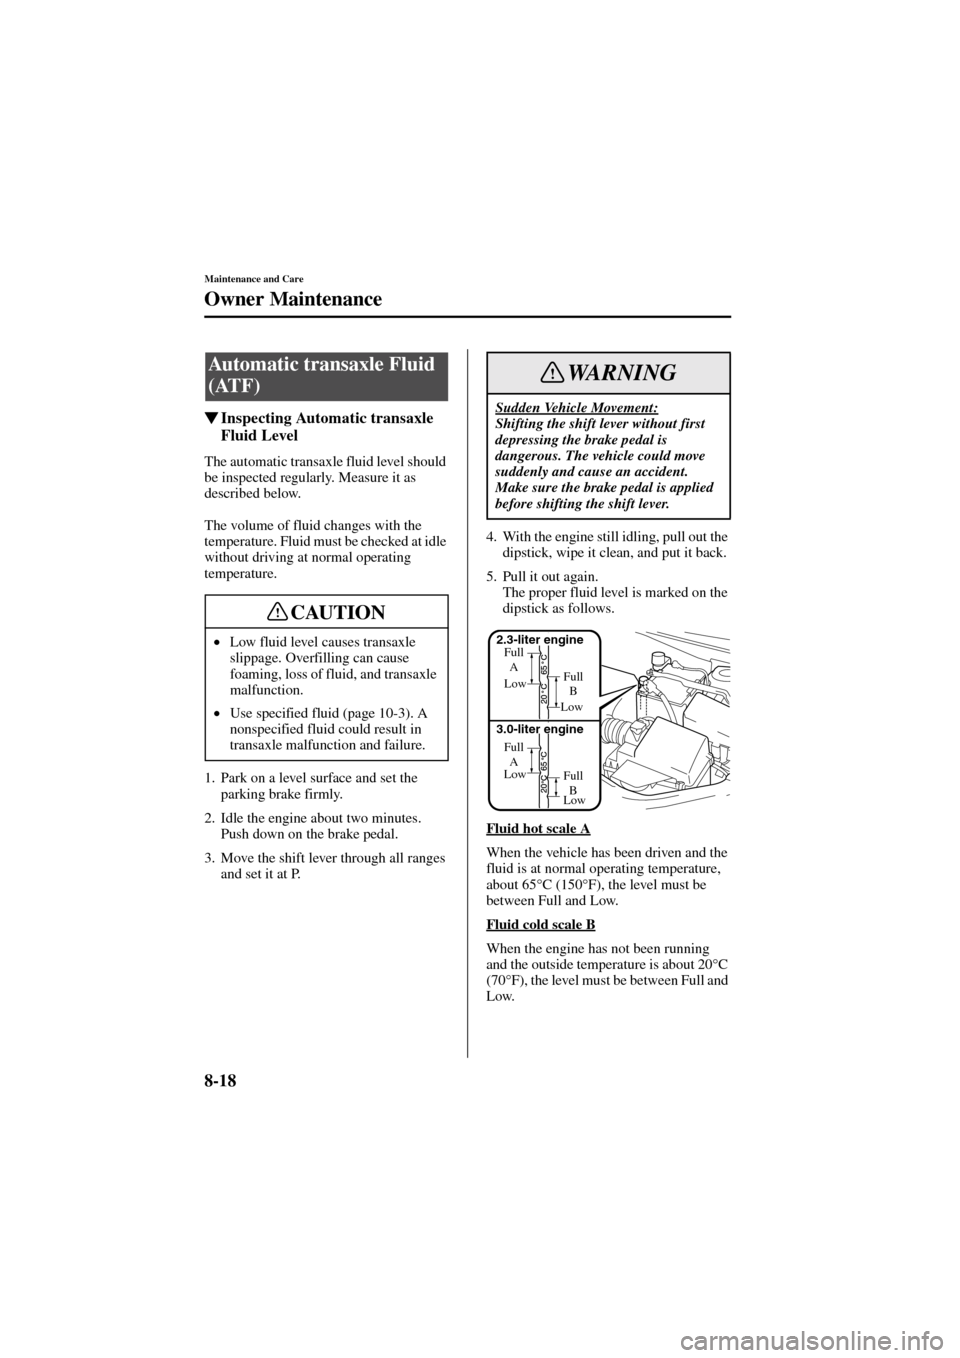 MAZDA MODEL 6 2004  Owners Manual (in English) 8-18
Maintenance and Care
Owner Maintenance
Form No. 8R29-EA-02I
Inspecting Automatic transaxle 
Fluid Level
The automatic transaxle fluid level should 
be inspected regularly. Measure it as 
describ